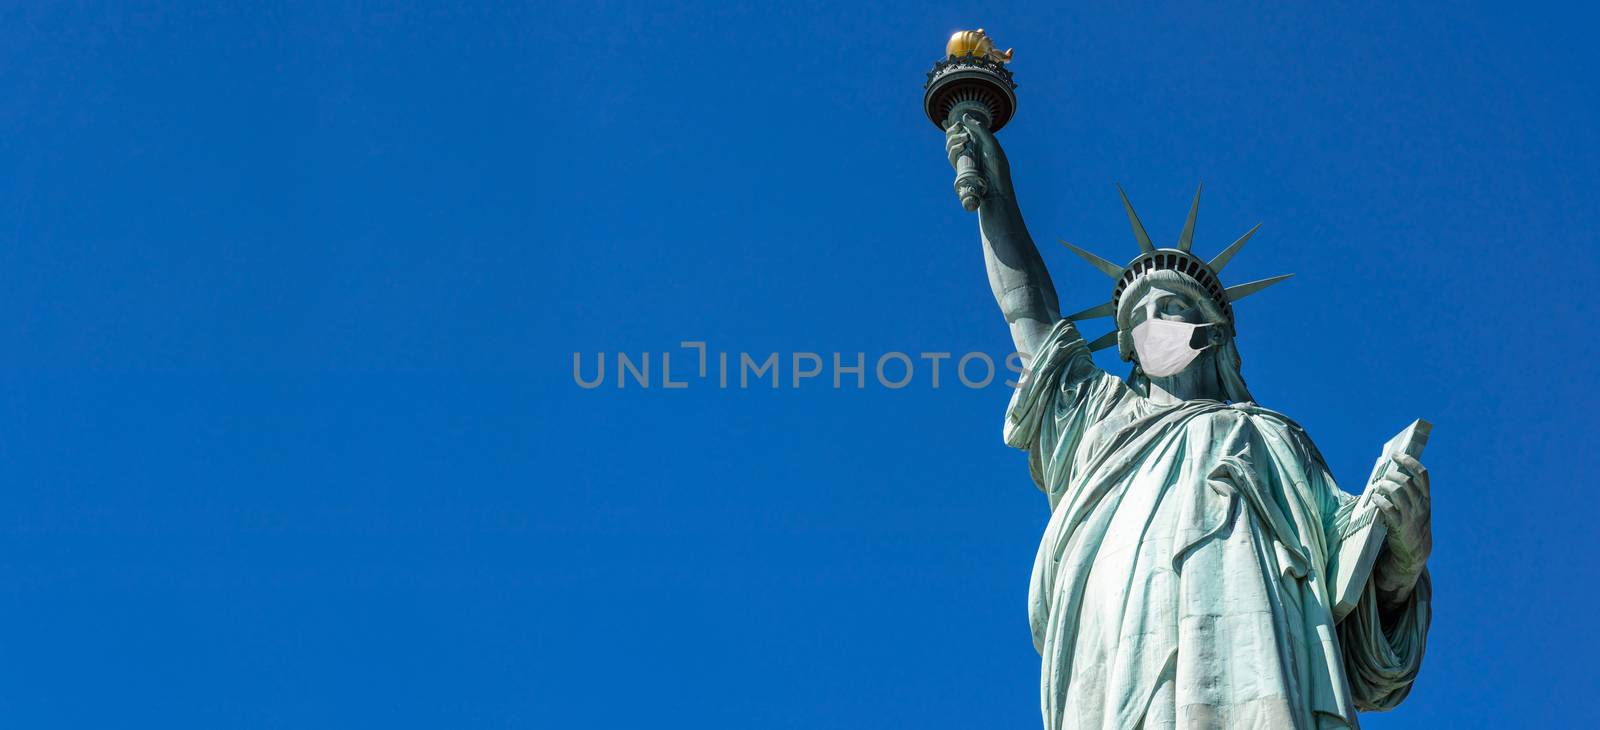 The Statue of Liberty wearing surgical mask when Covid-19 Outbre by Tzido